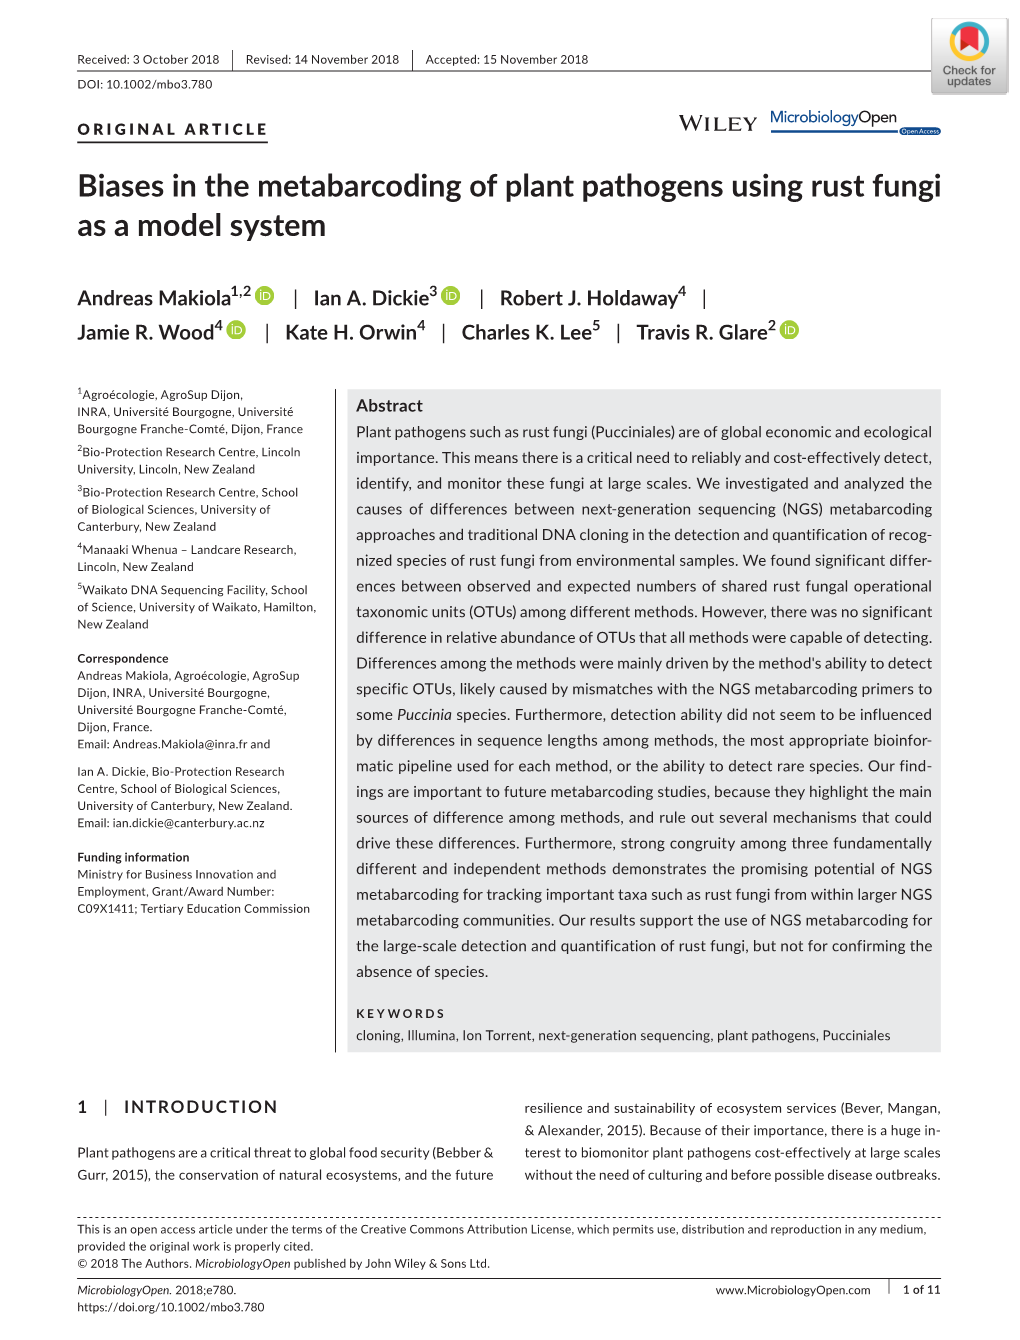 Biases in the Metabarcoding of Plant Pathogens Using Rust Fungi As a Model System